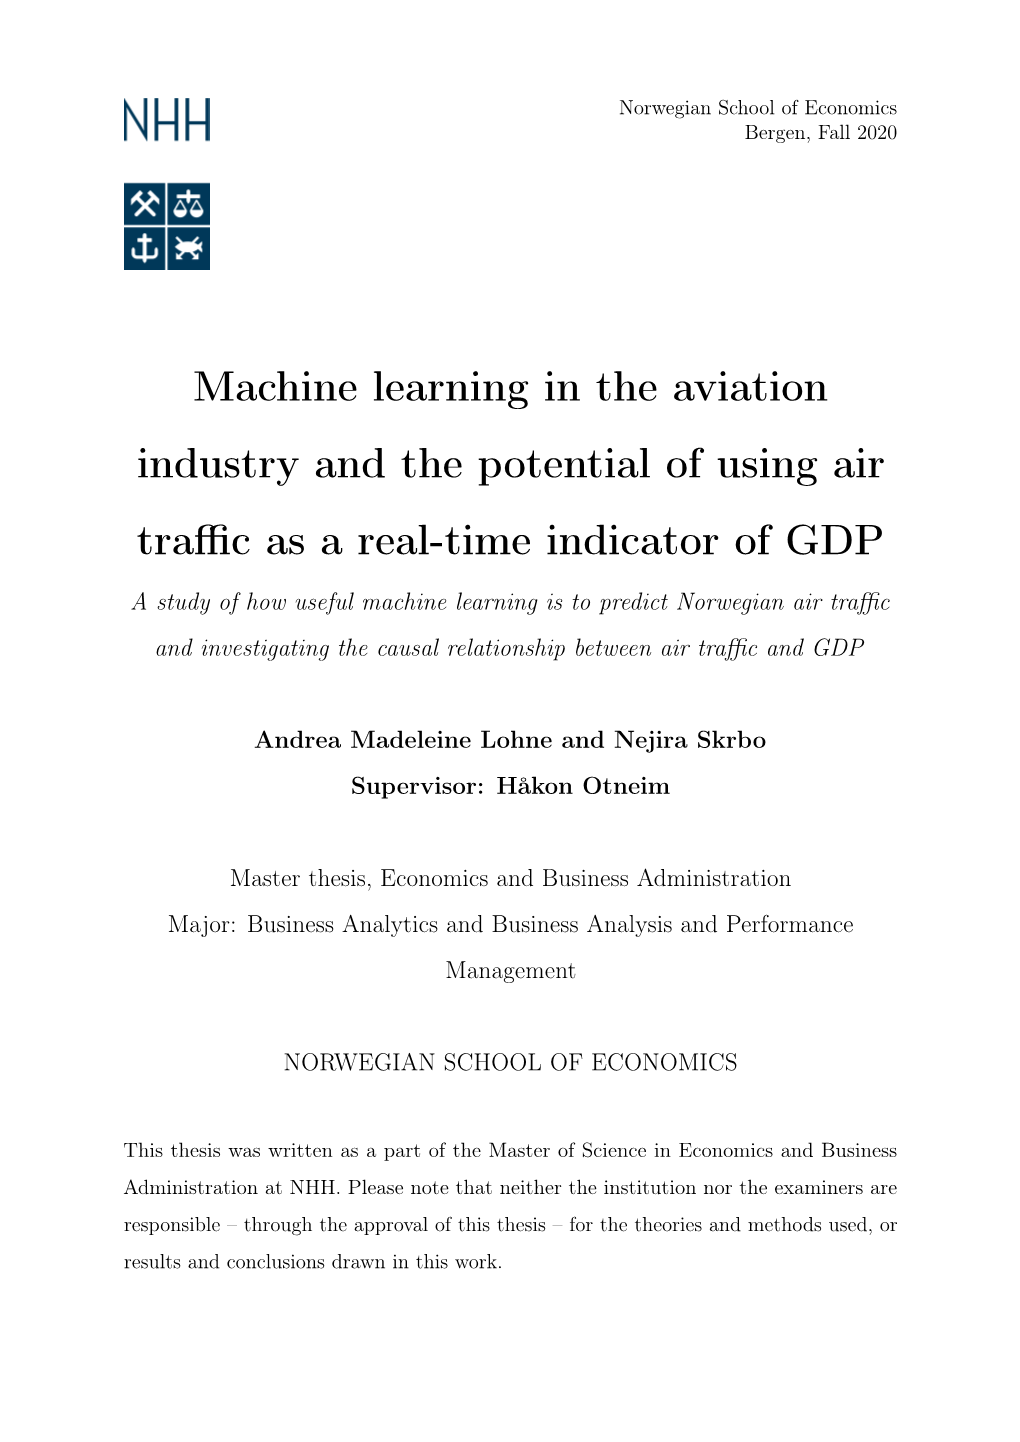 Machine Learning in the Aviation Industry and the Potential of Using Air Traﬃc As a Real-Time Indicator of GDP